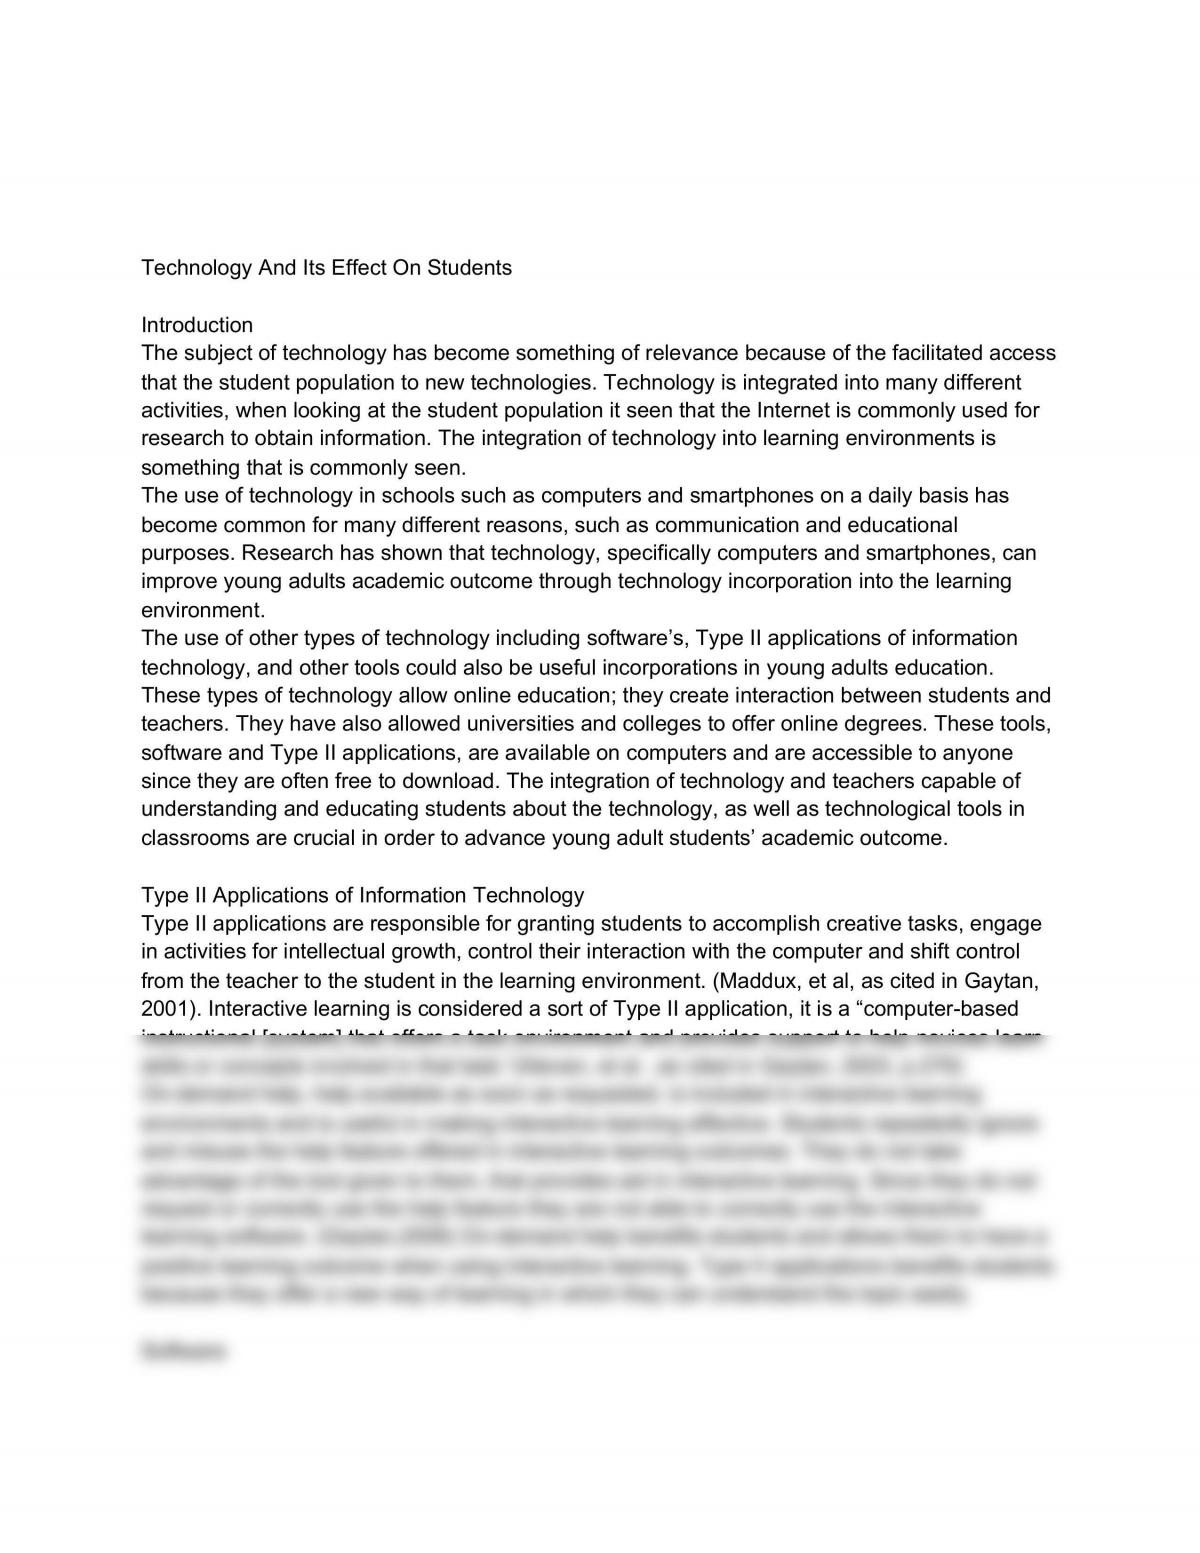 Technology And Its Effect On Students - Page 1